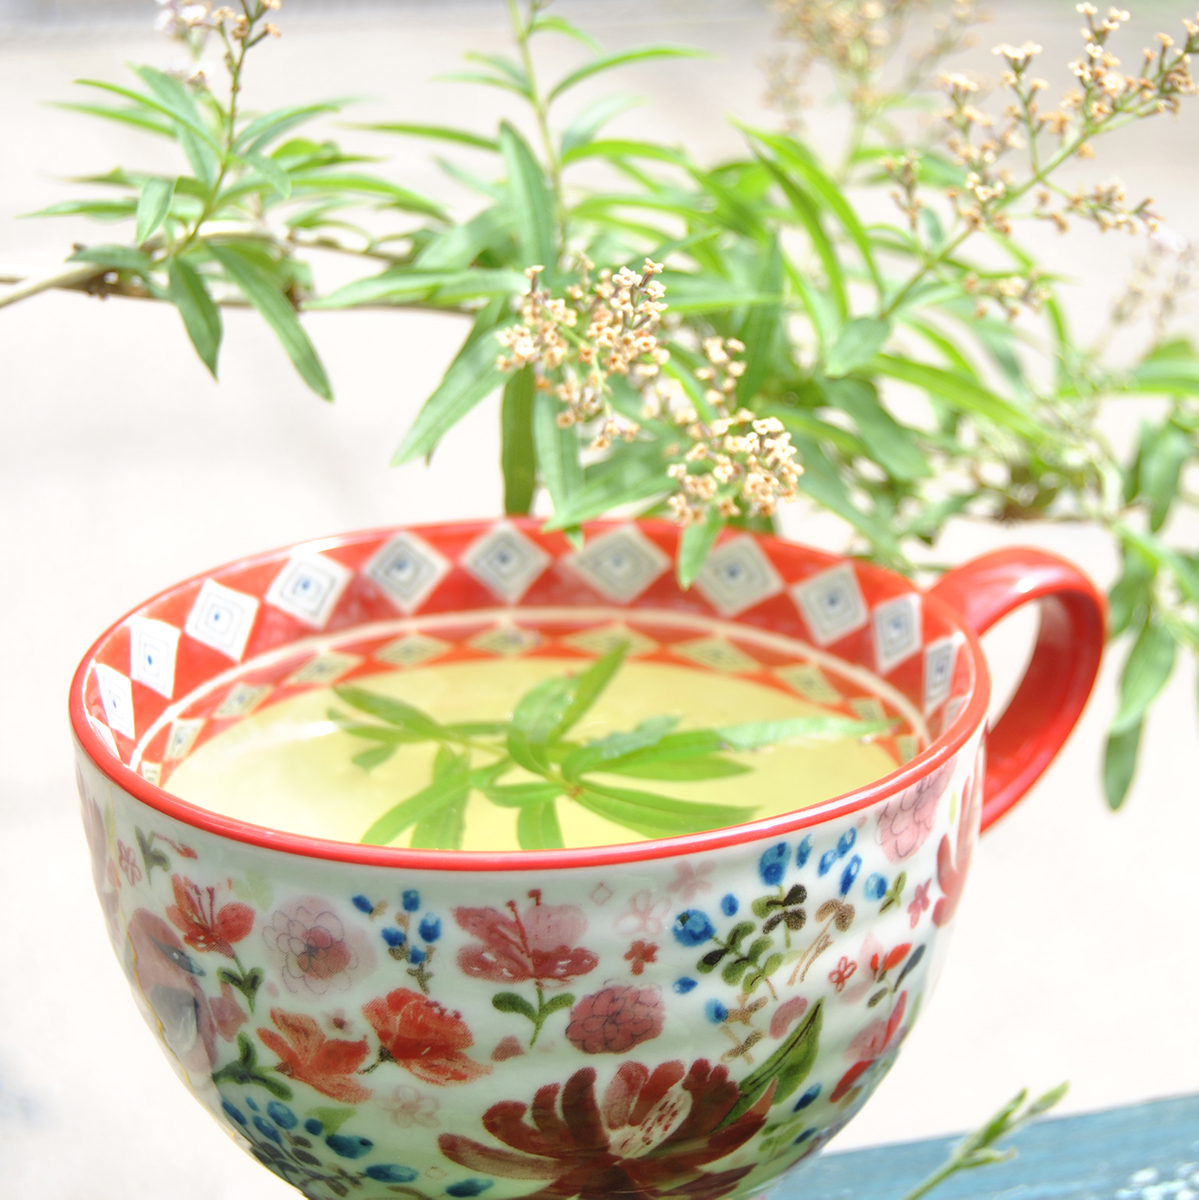 Simple Herbal Remedies training (Free!) Ten workshops running fortnightly between February and June will cover the basics of herbal medicine showing you how to create and use your own herbal kitchen pharmacy for all the family. Info and registration: bit.ly/jbcgherbalreme…